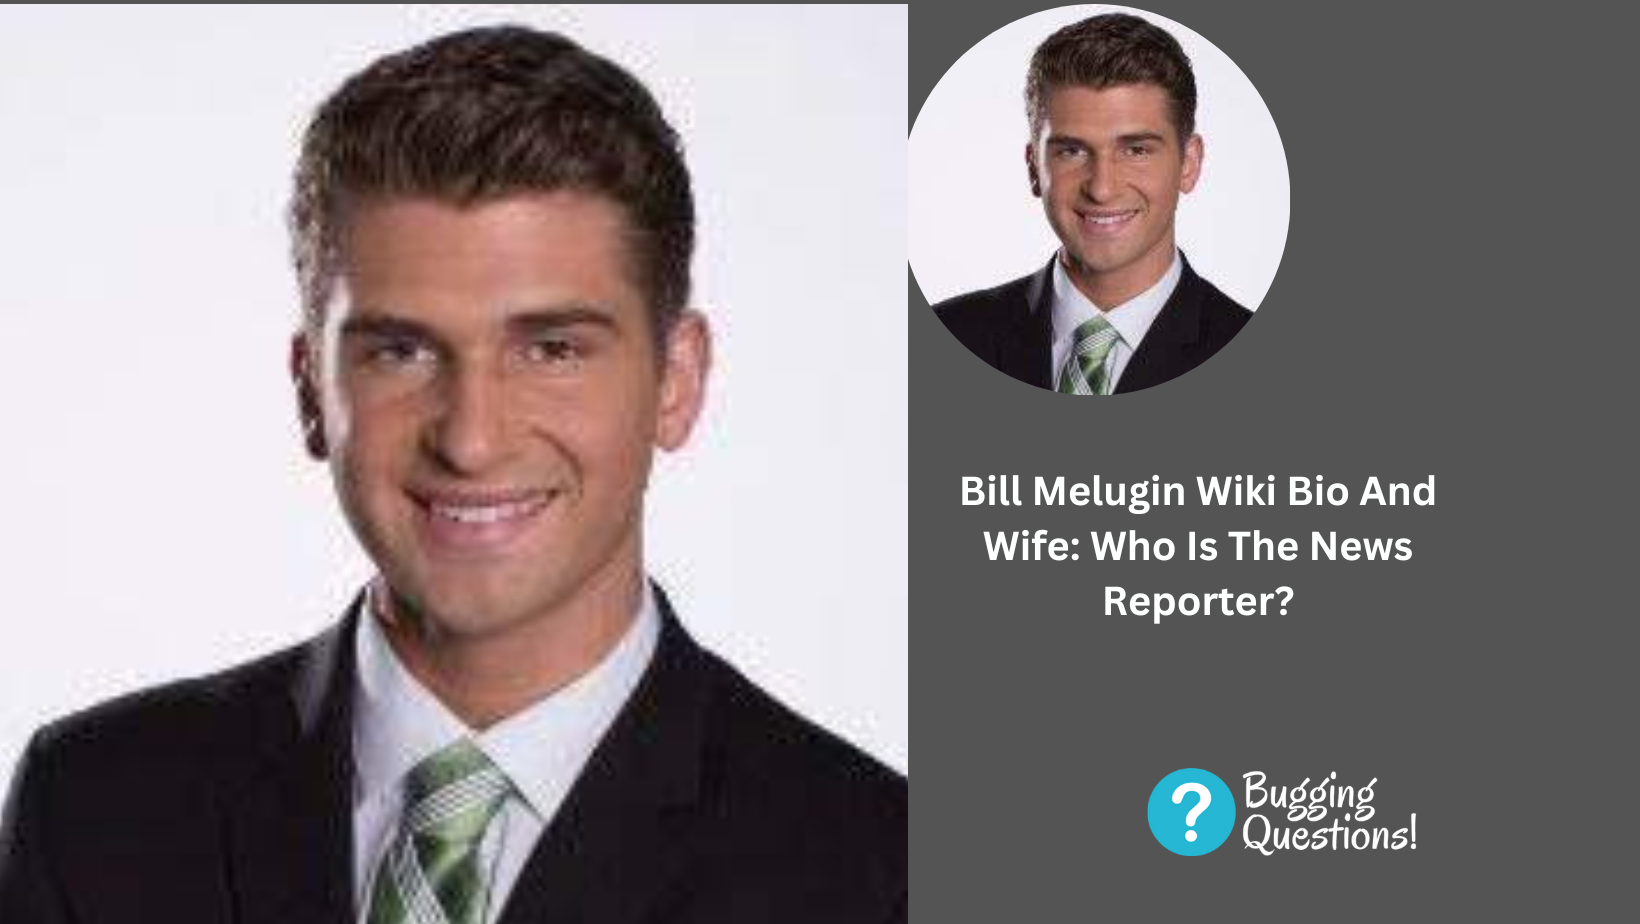 Bill Melugin Wiki Bio And Wife: Who Is The News Reporter?